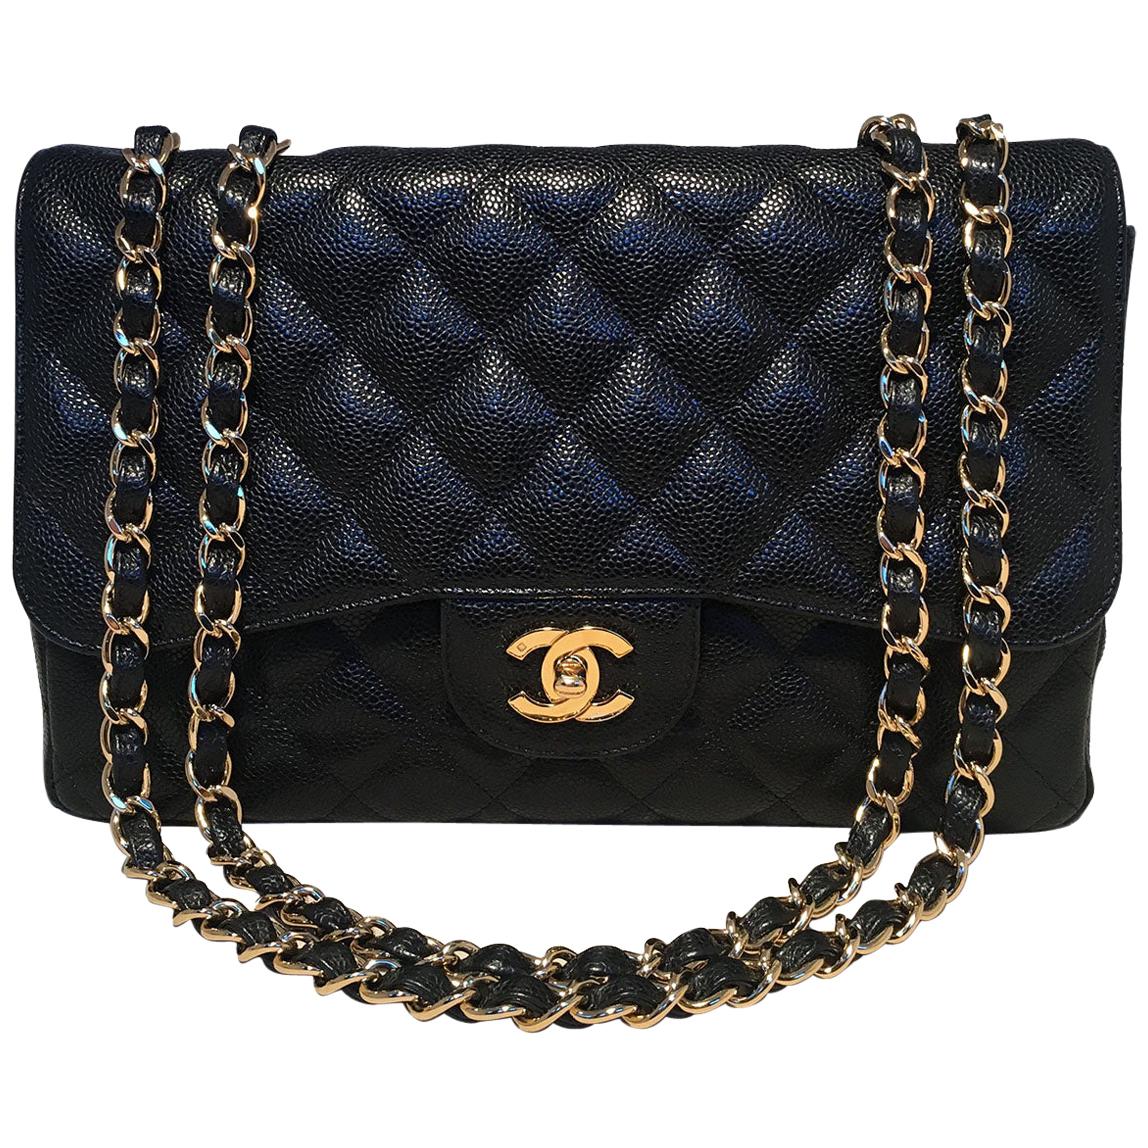 Chanel Black Quilted Caviar Leather Maxi Classic Flap Shoulder Bag